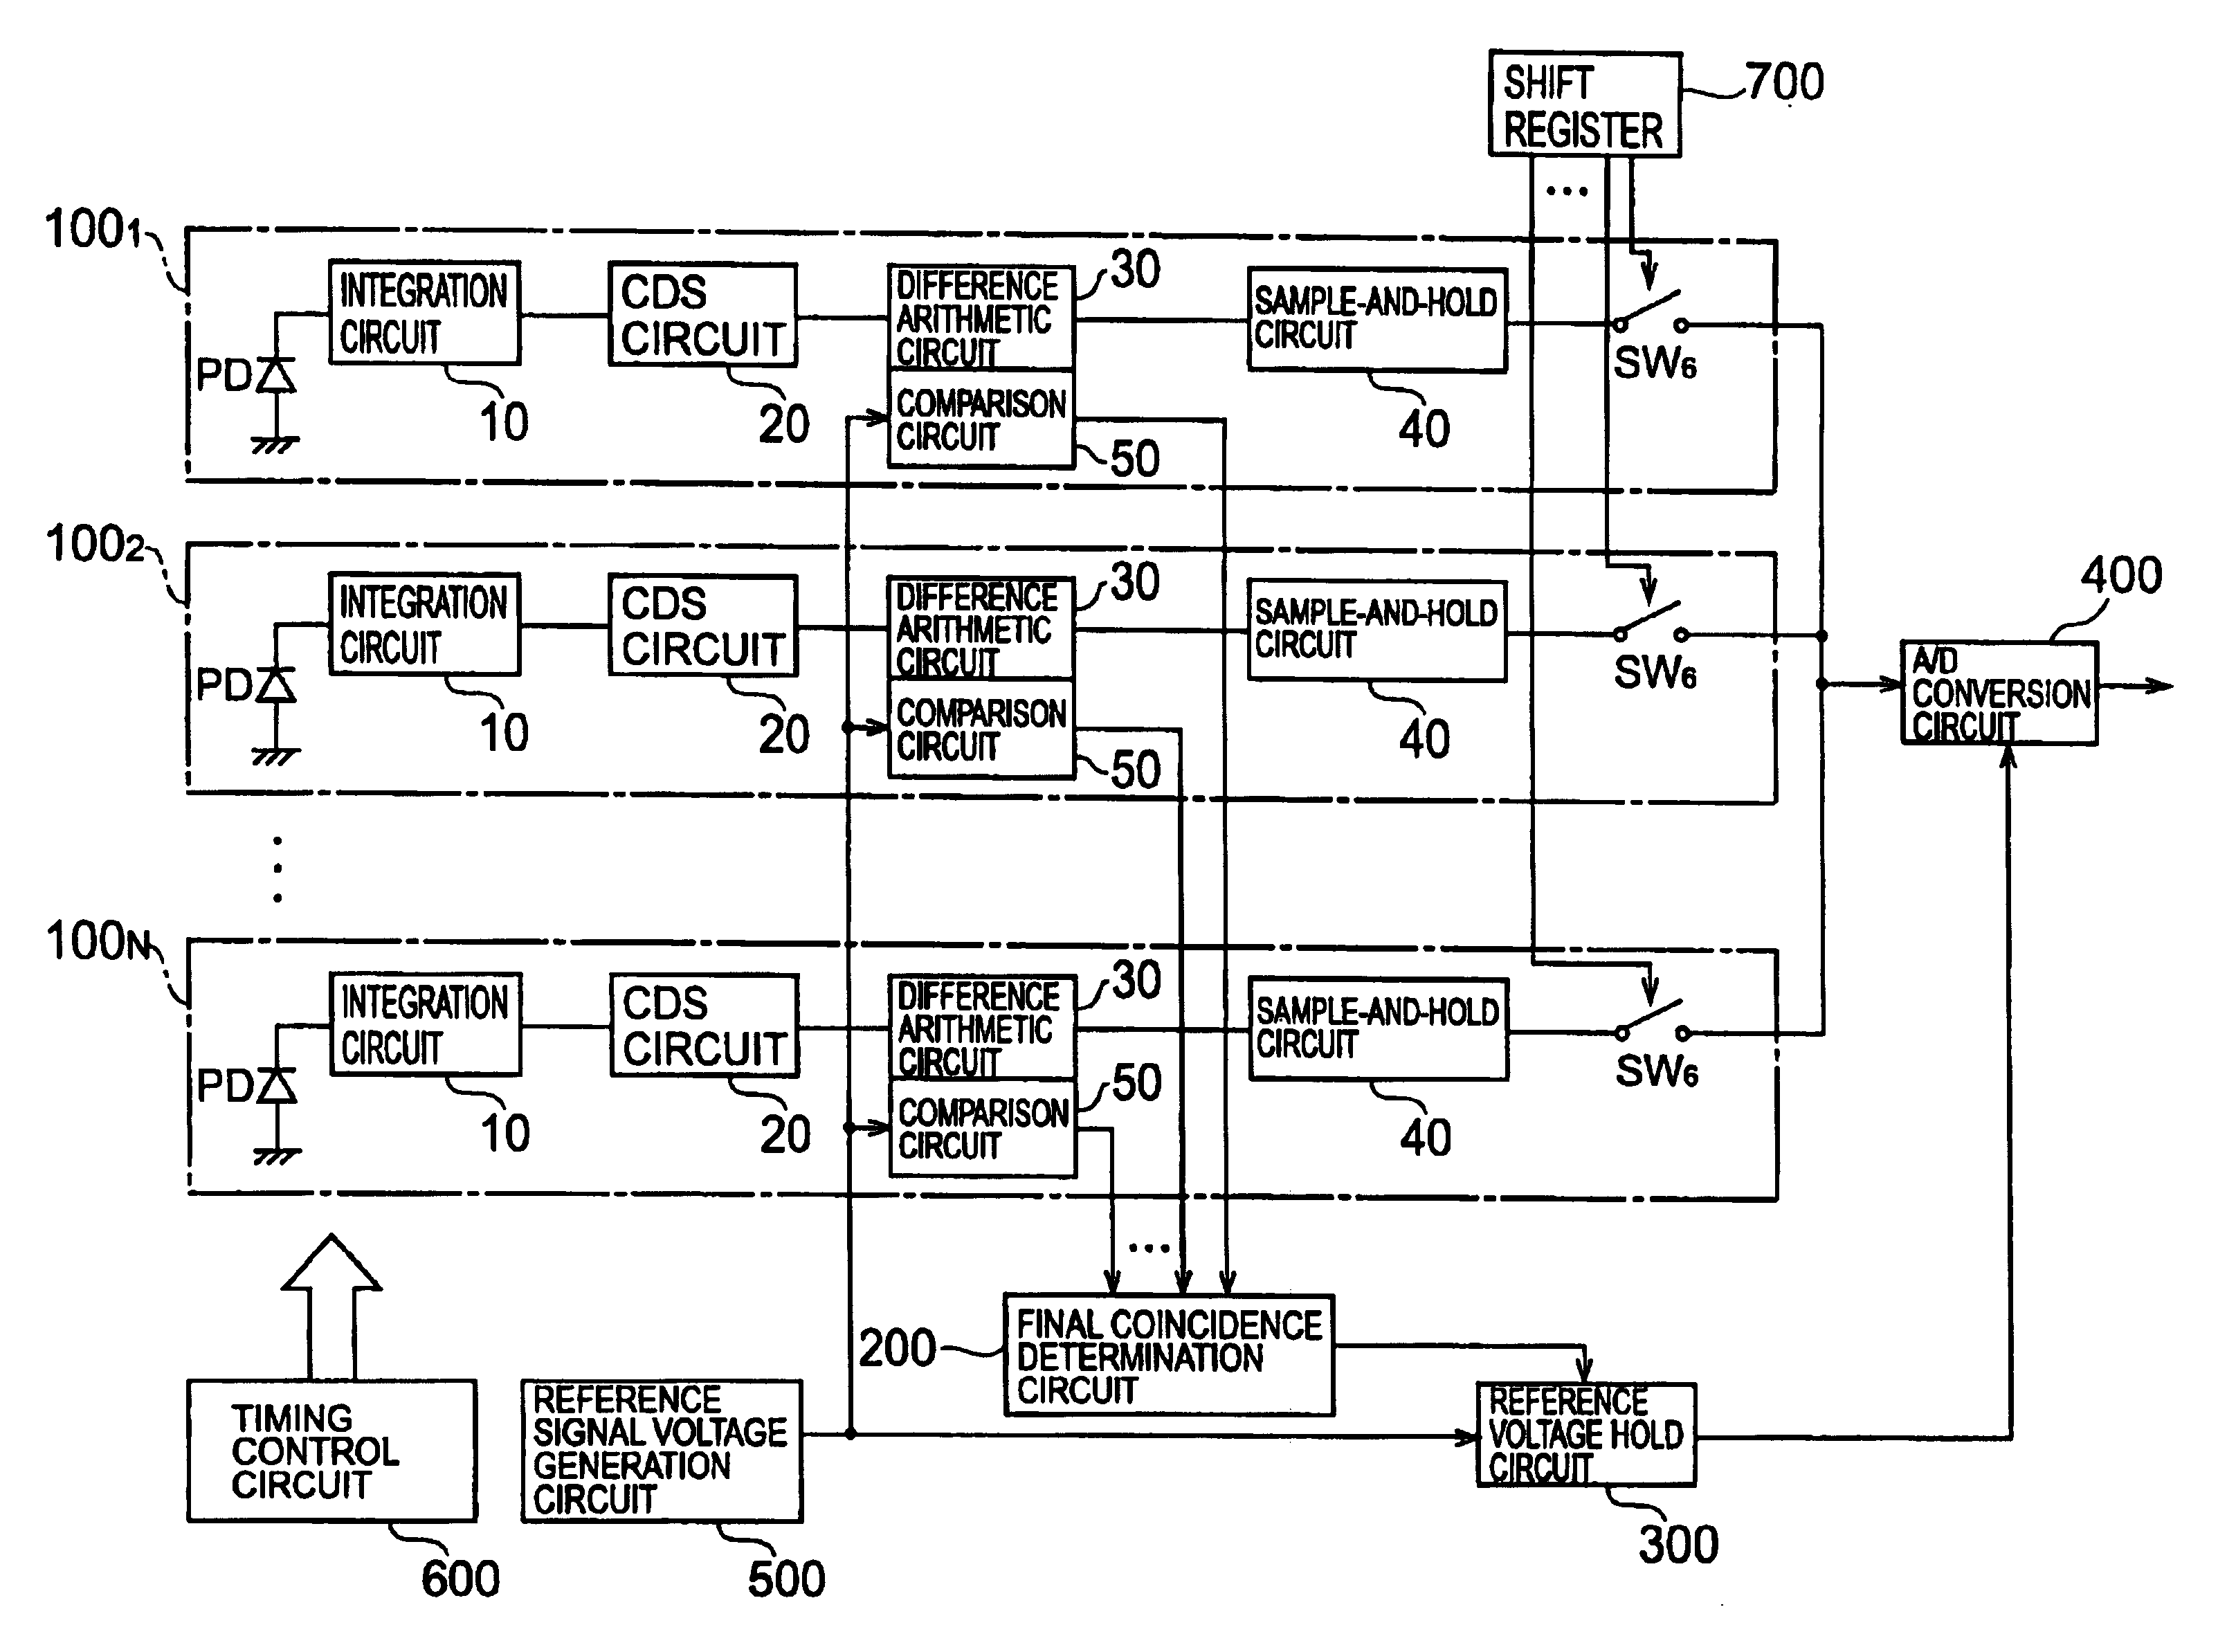 Solid-state imaging device and distance measuring device